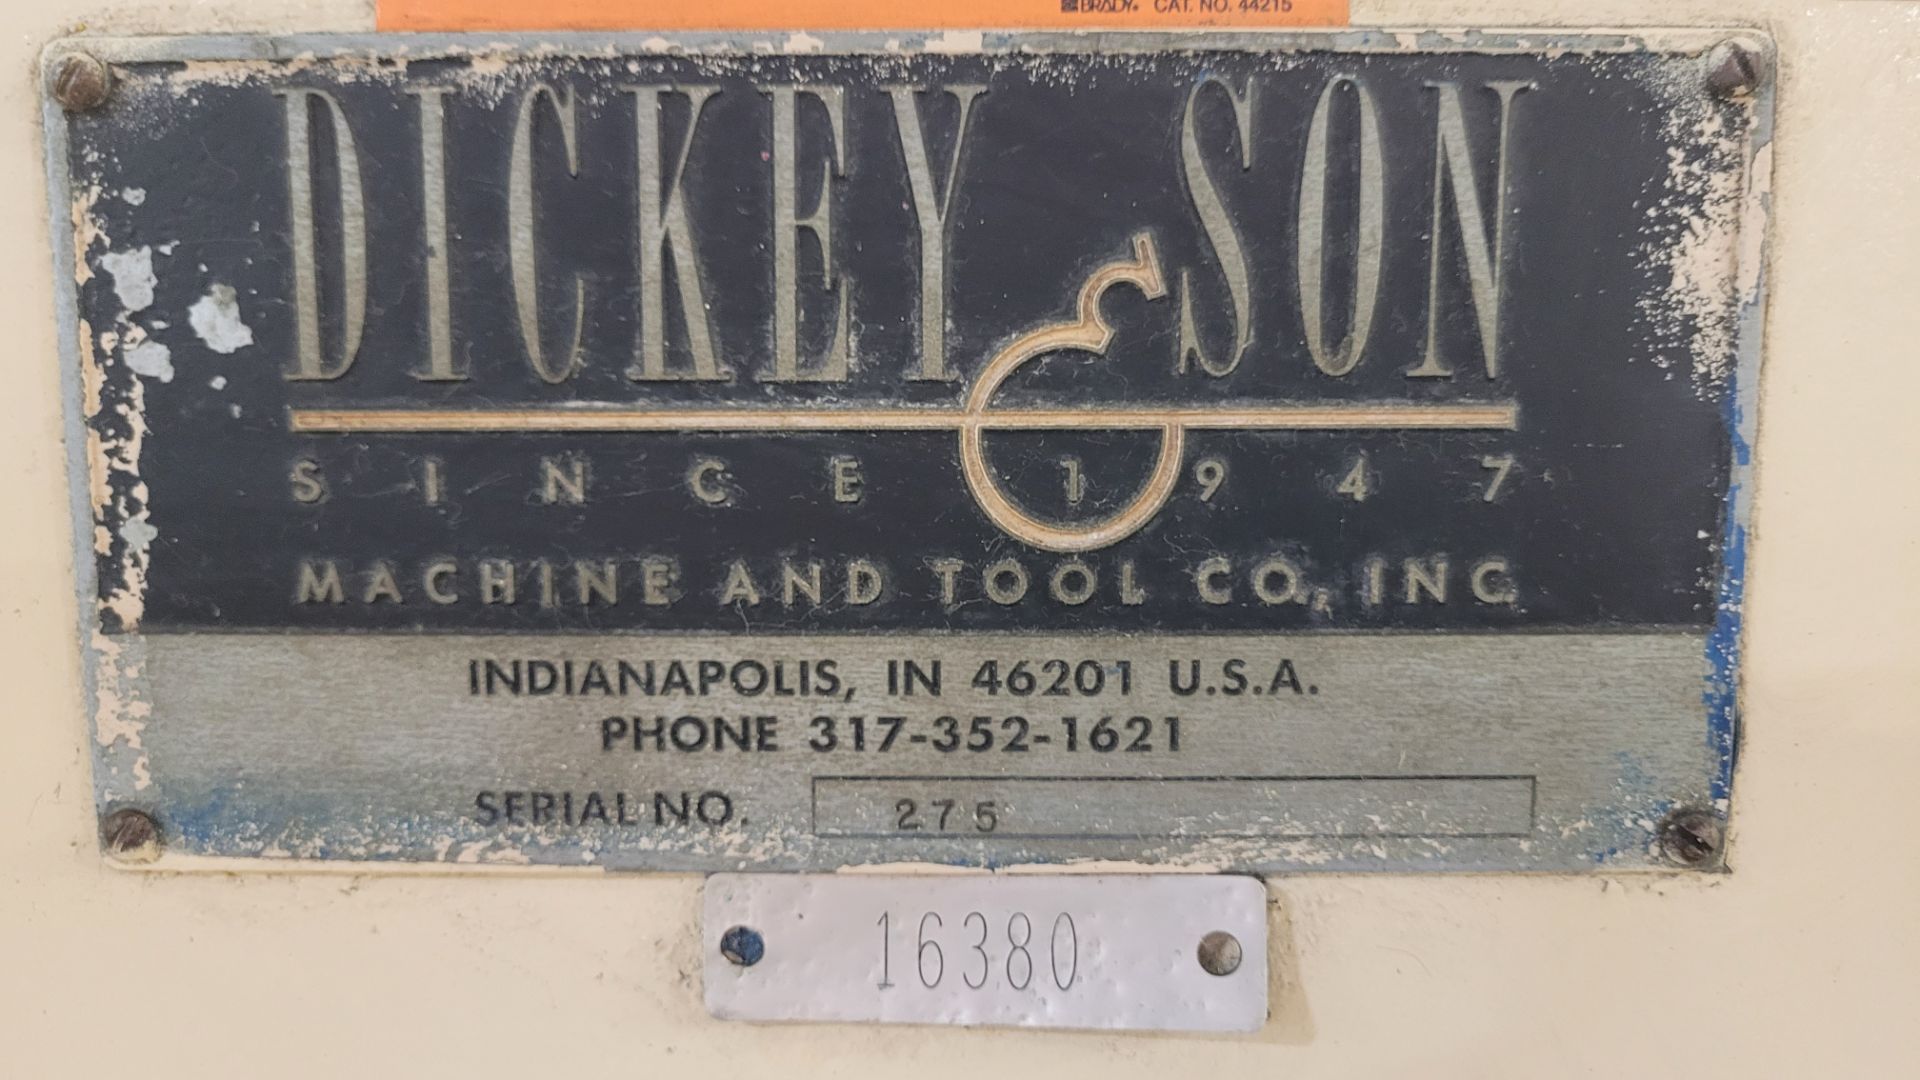 DICKEY & SON MULTI CYCLE ROTARY FORM NOTCH MACHINE MODEL 3 1/2, S/N 275 (RIGGING FEE $550) - Image 7 of 7